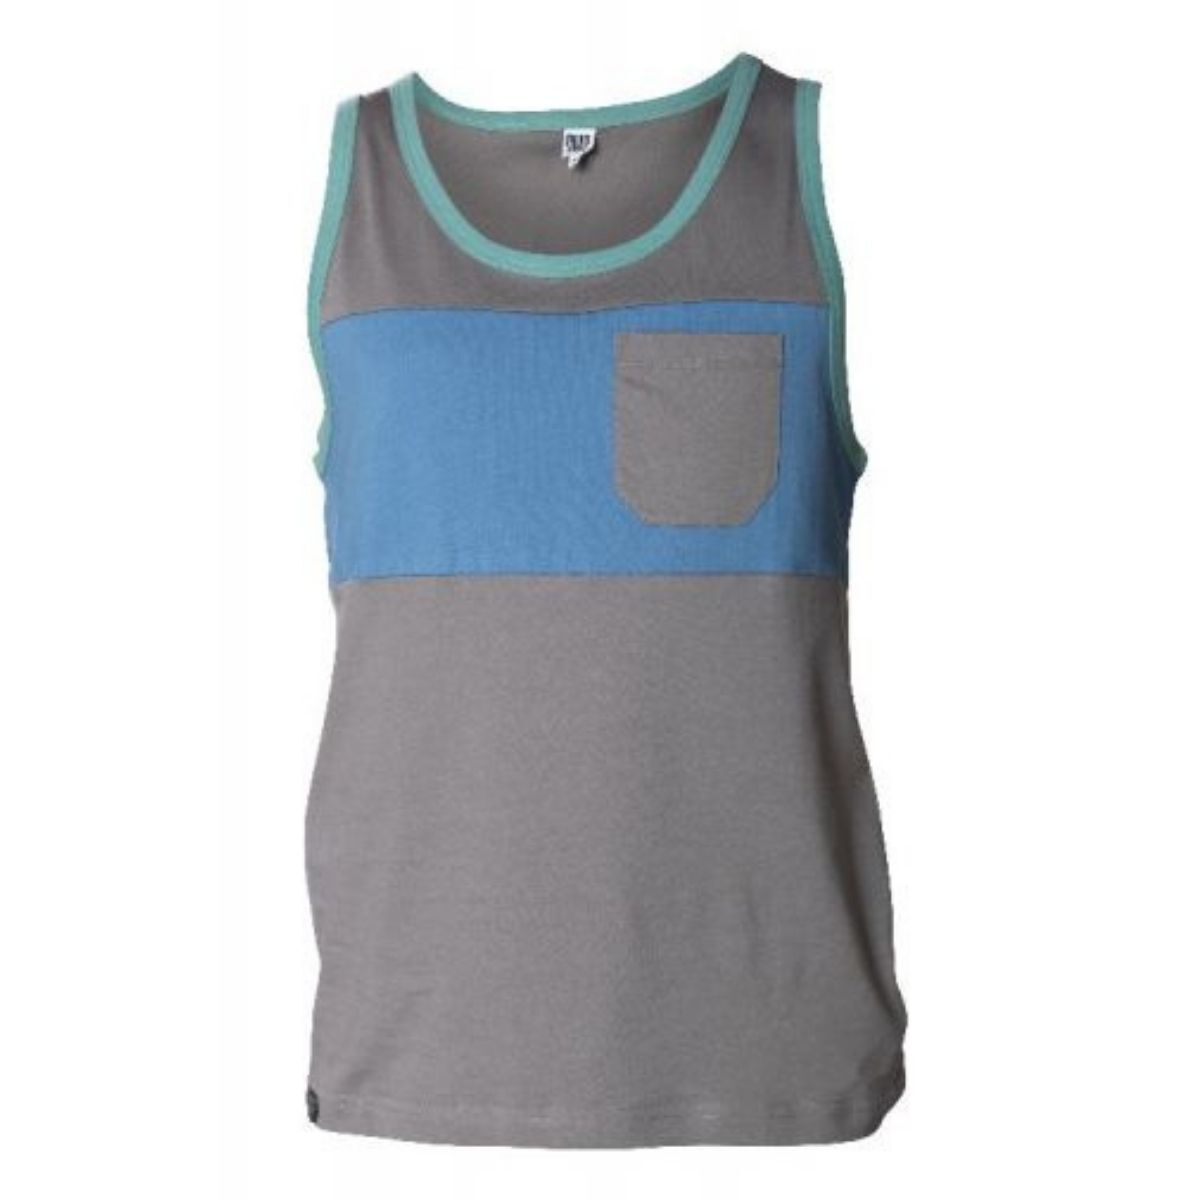 Snap Two-Colored Pocket Tank Top - Camiseta sin mangas - Hombre